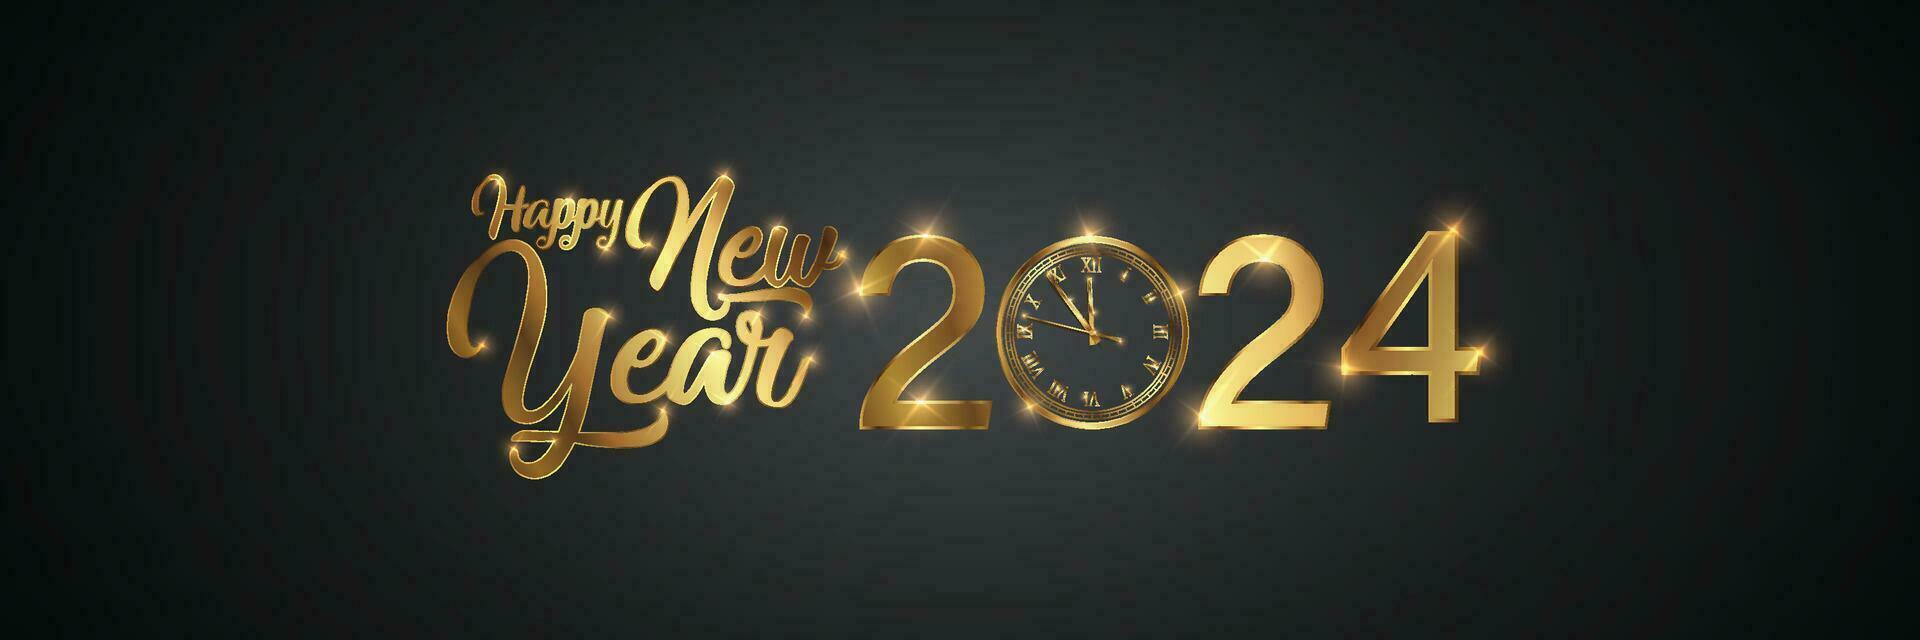 Happy new 2024 year Elegant gold text with fireworks, clock and light. Minimalistic text template. vector